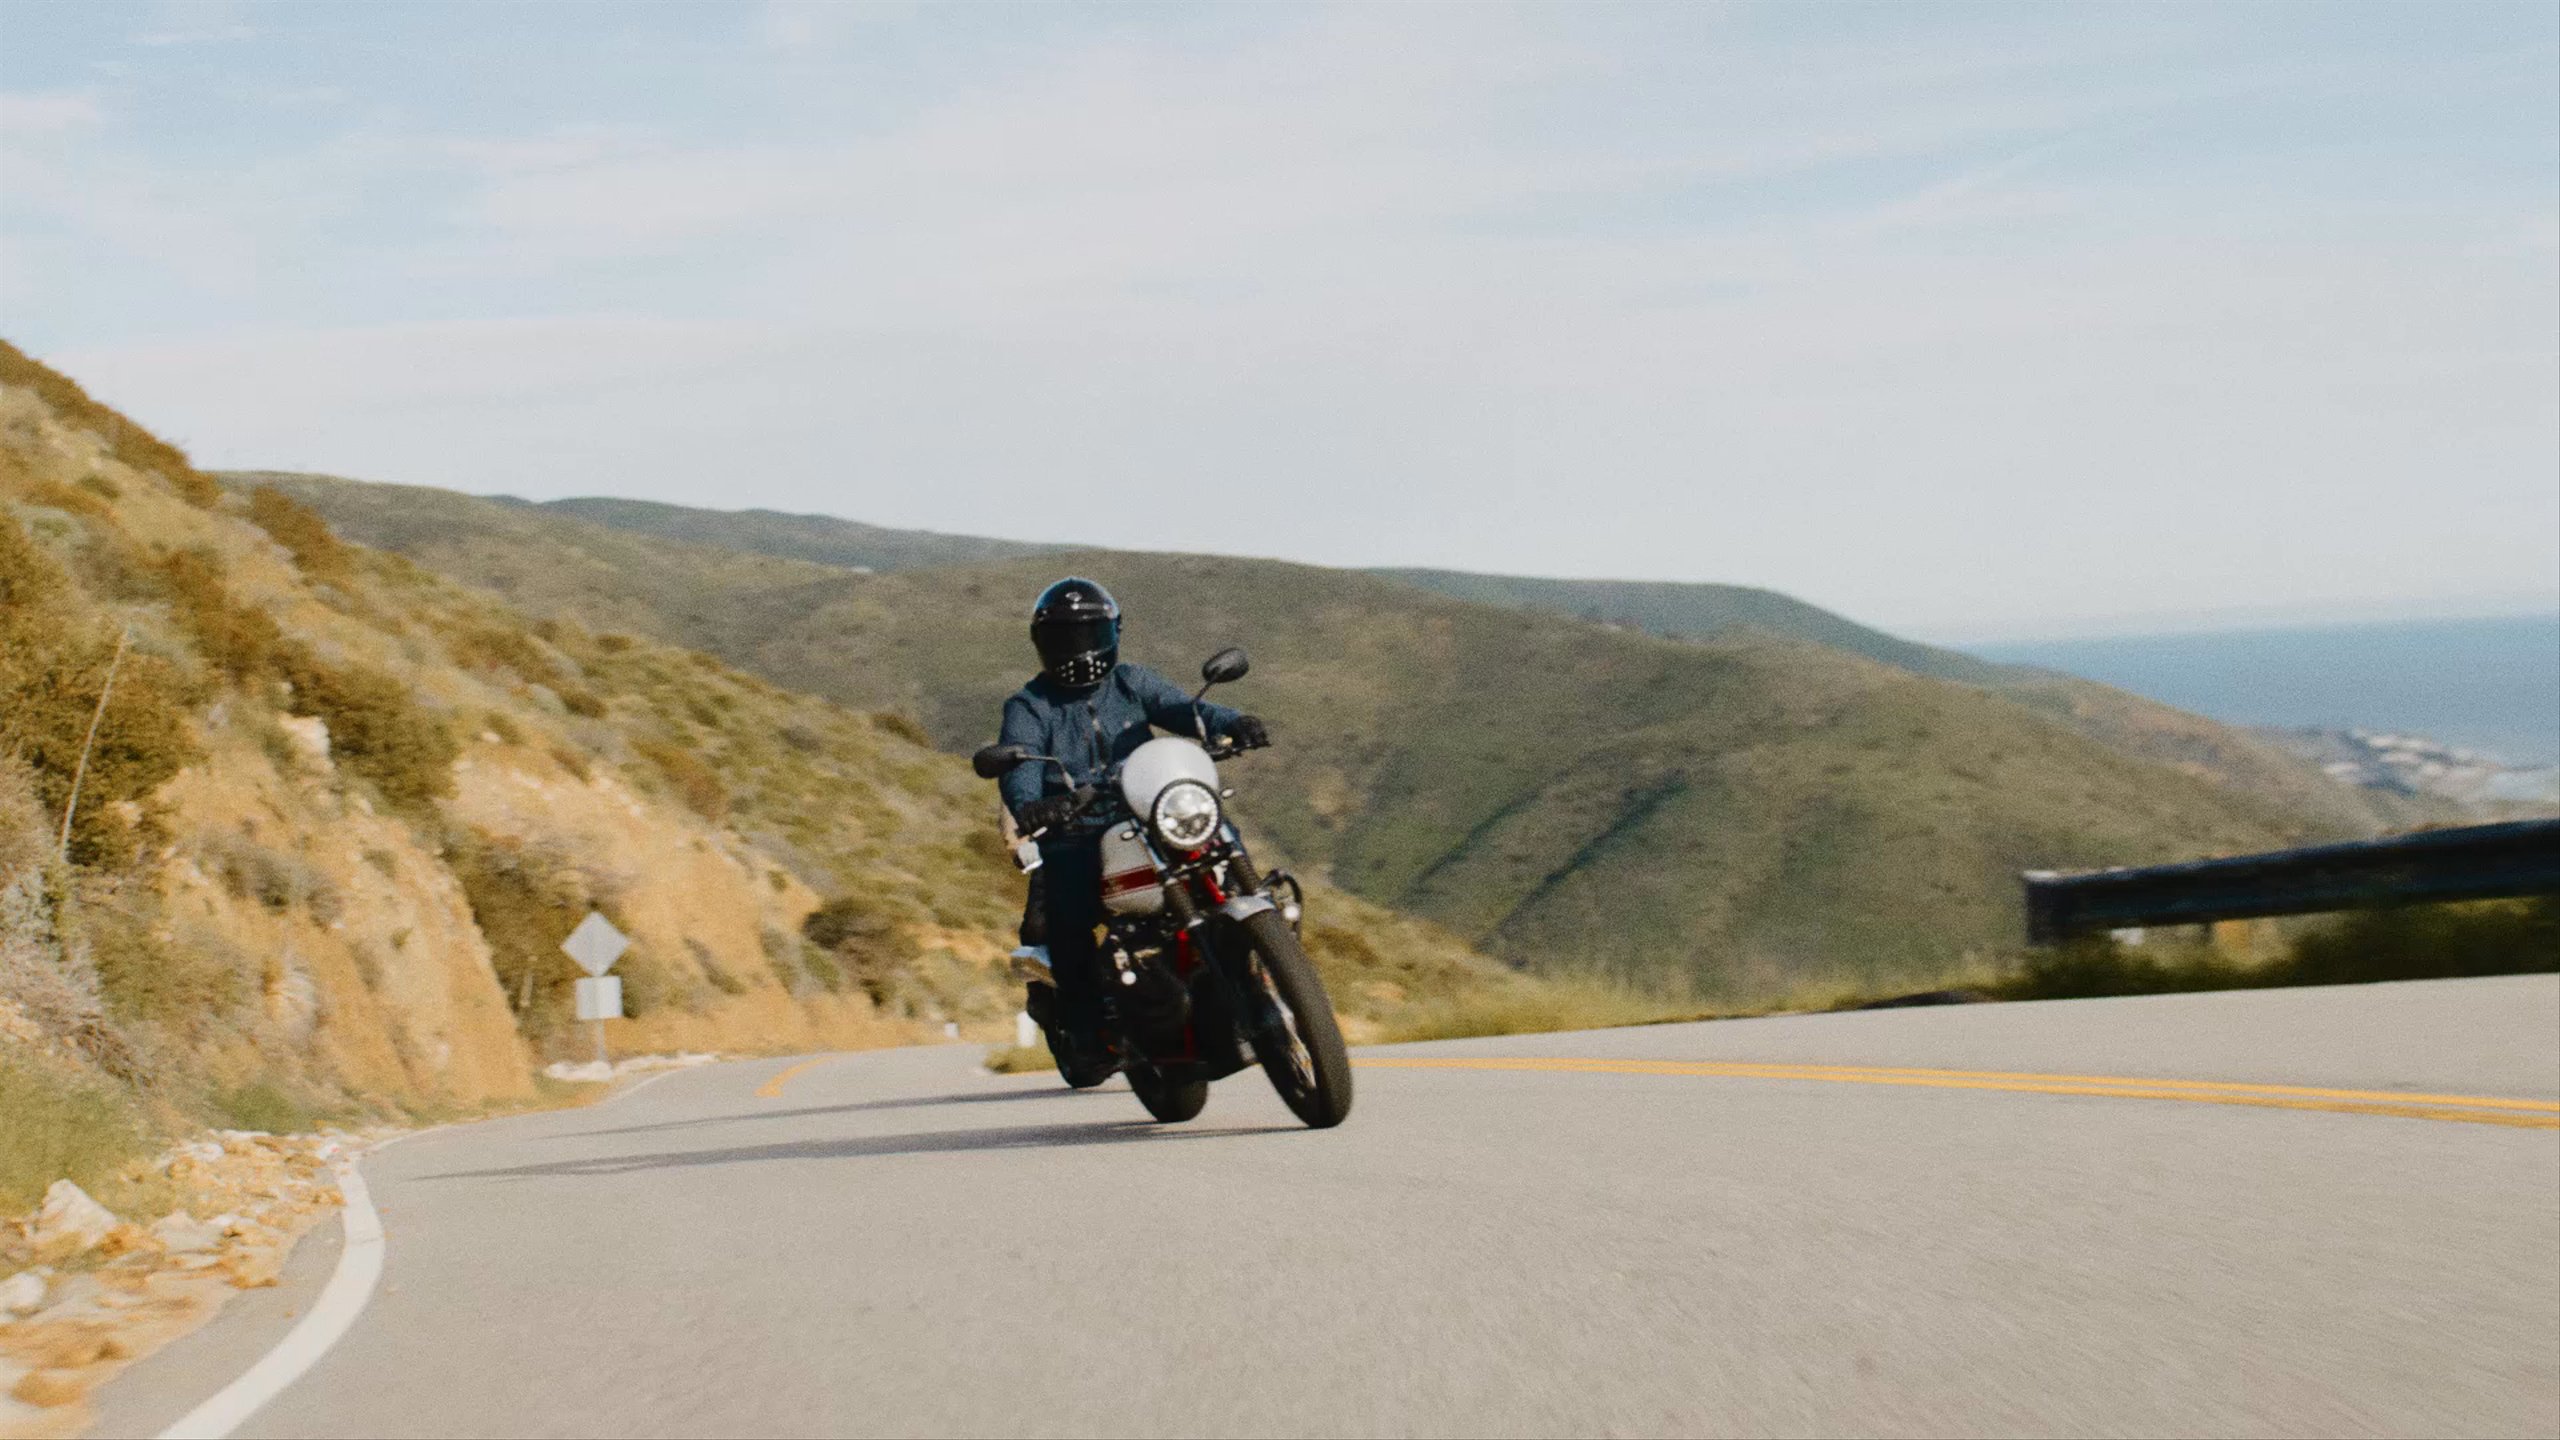 Video of two motorcyclists riding up Malibu hills with Pacific Ocean in the background